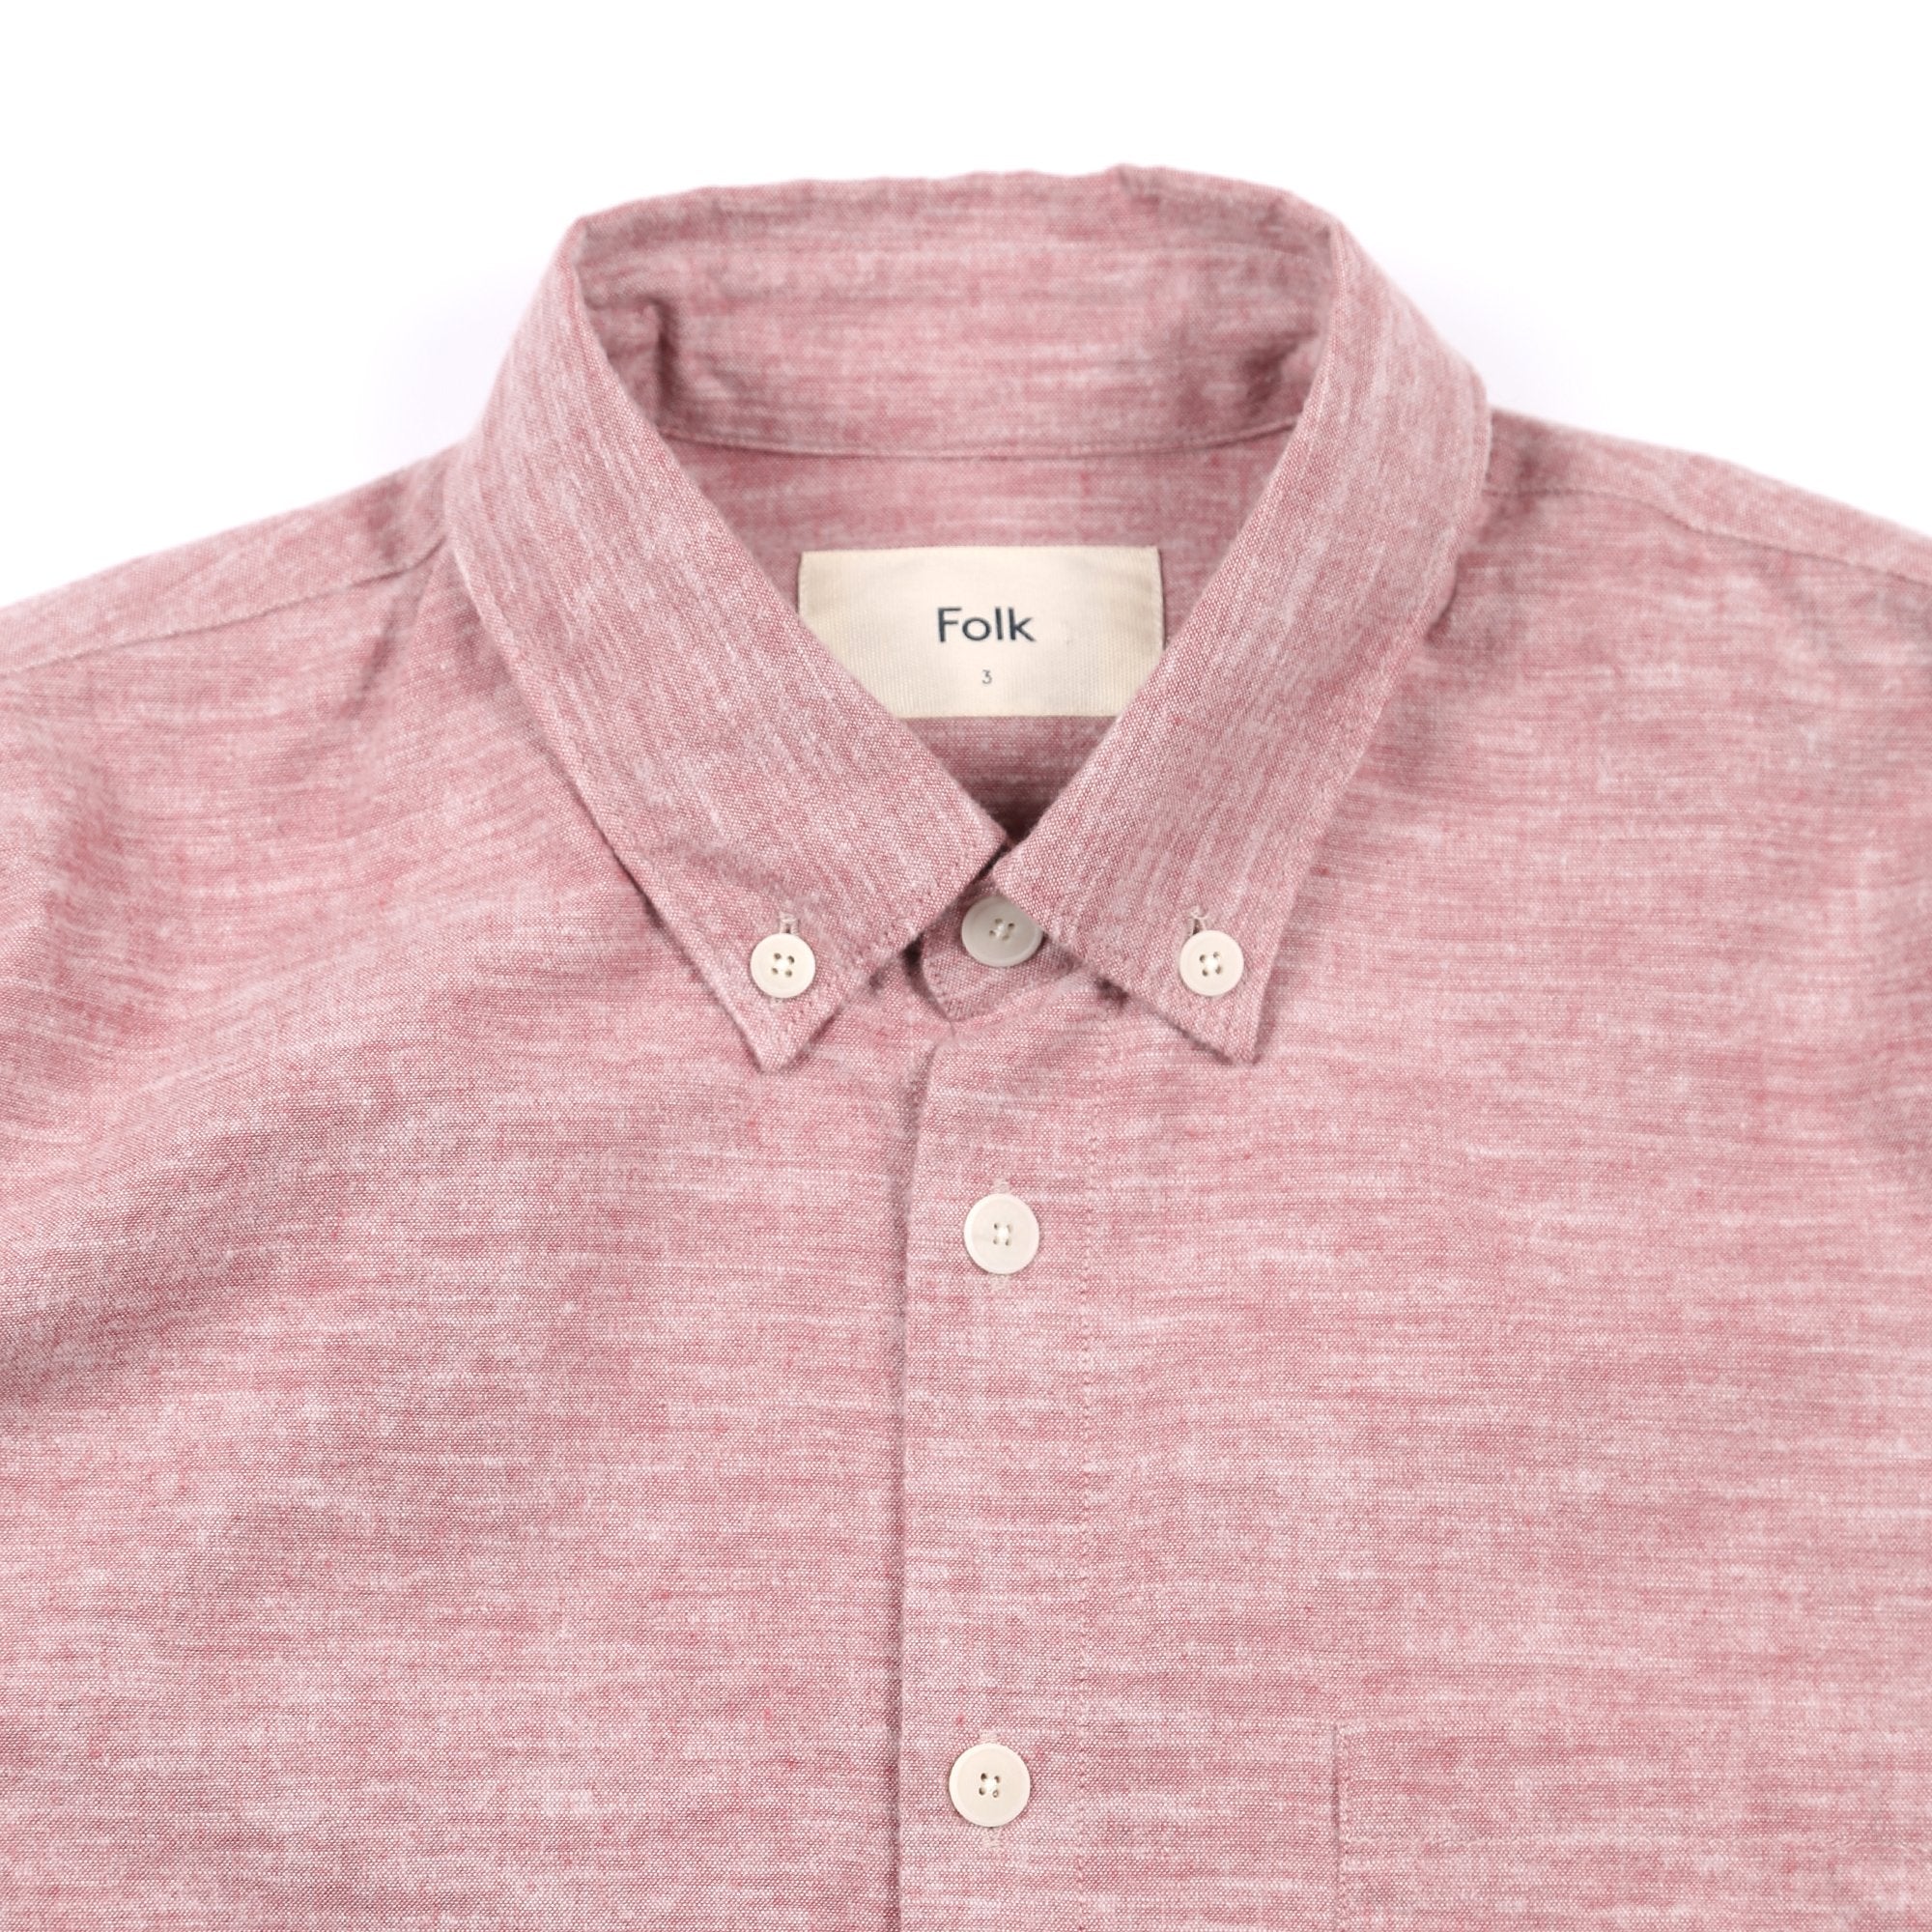 Relaxed Fit Shirt - Brick